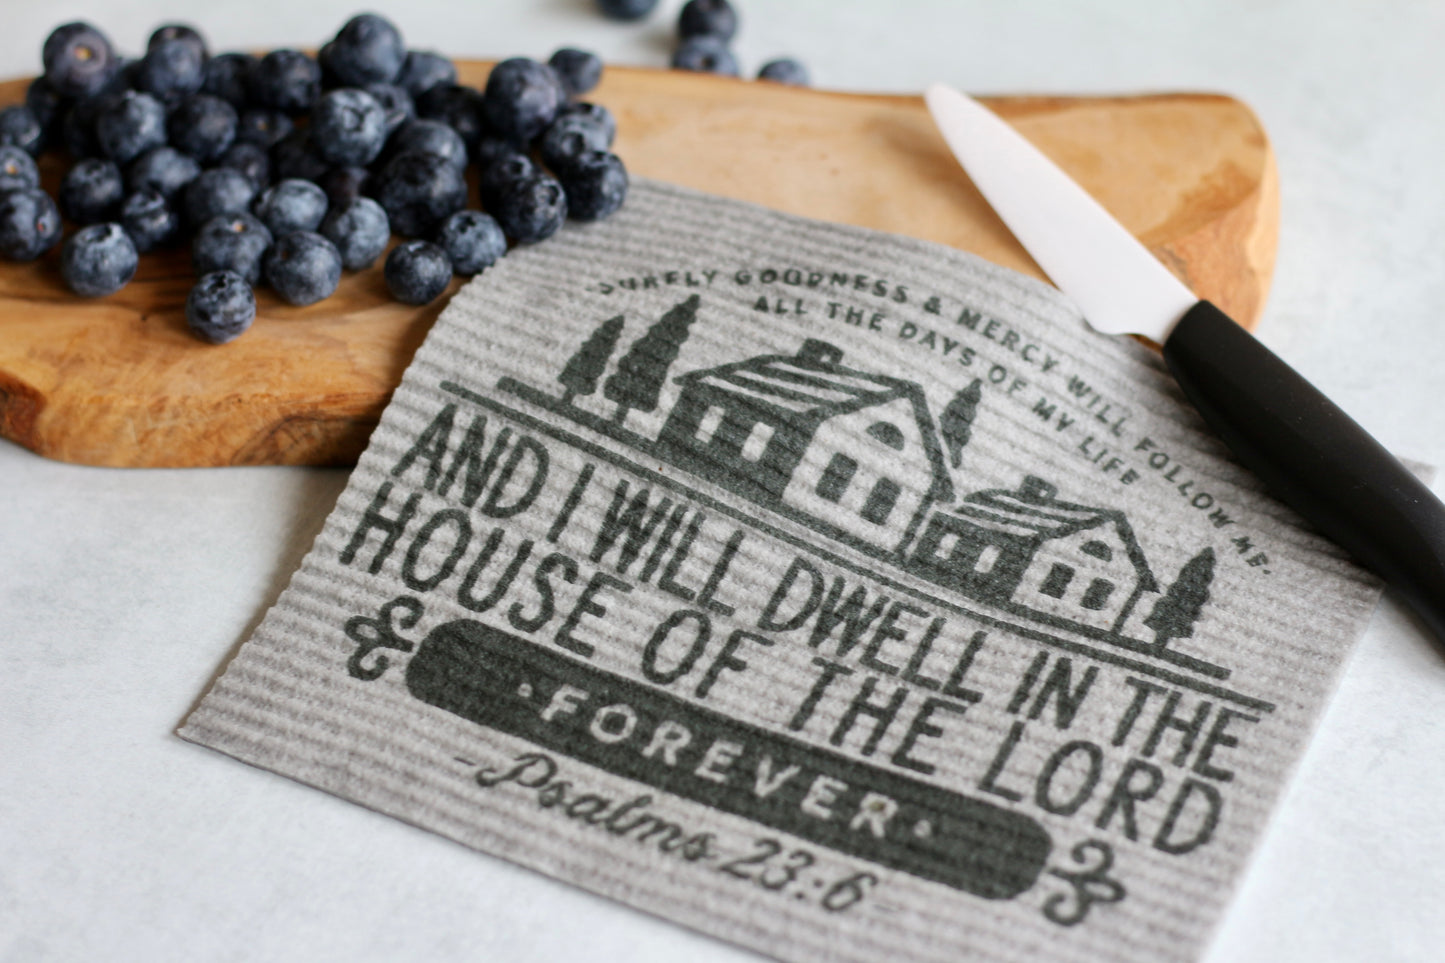 surely goodness & mercy will follow me - I will dwell in the house of the Lord forever (Psalms 23:6) - Swedish dishcloth